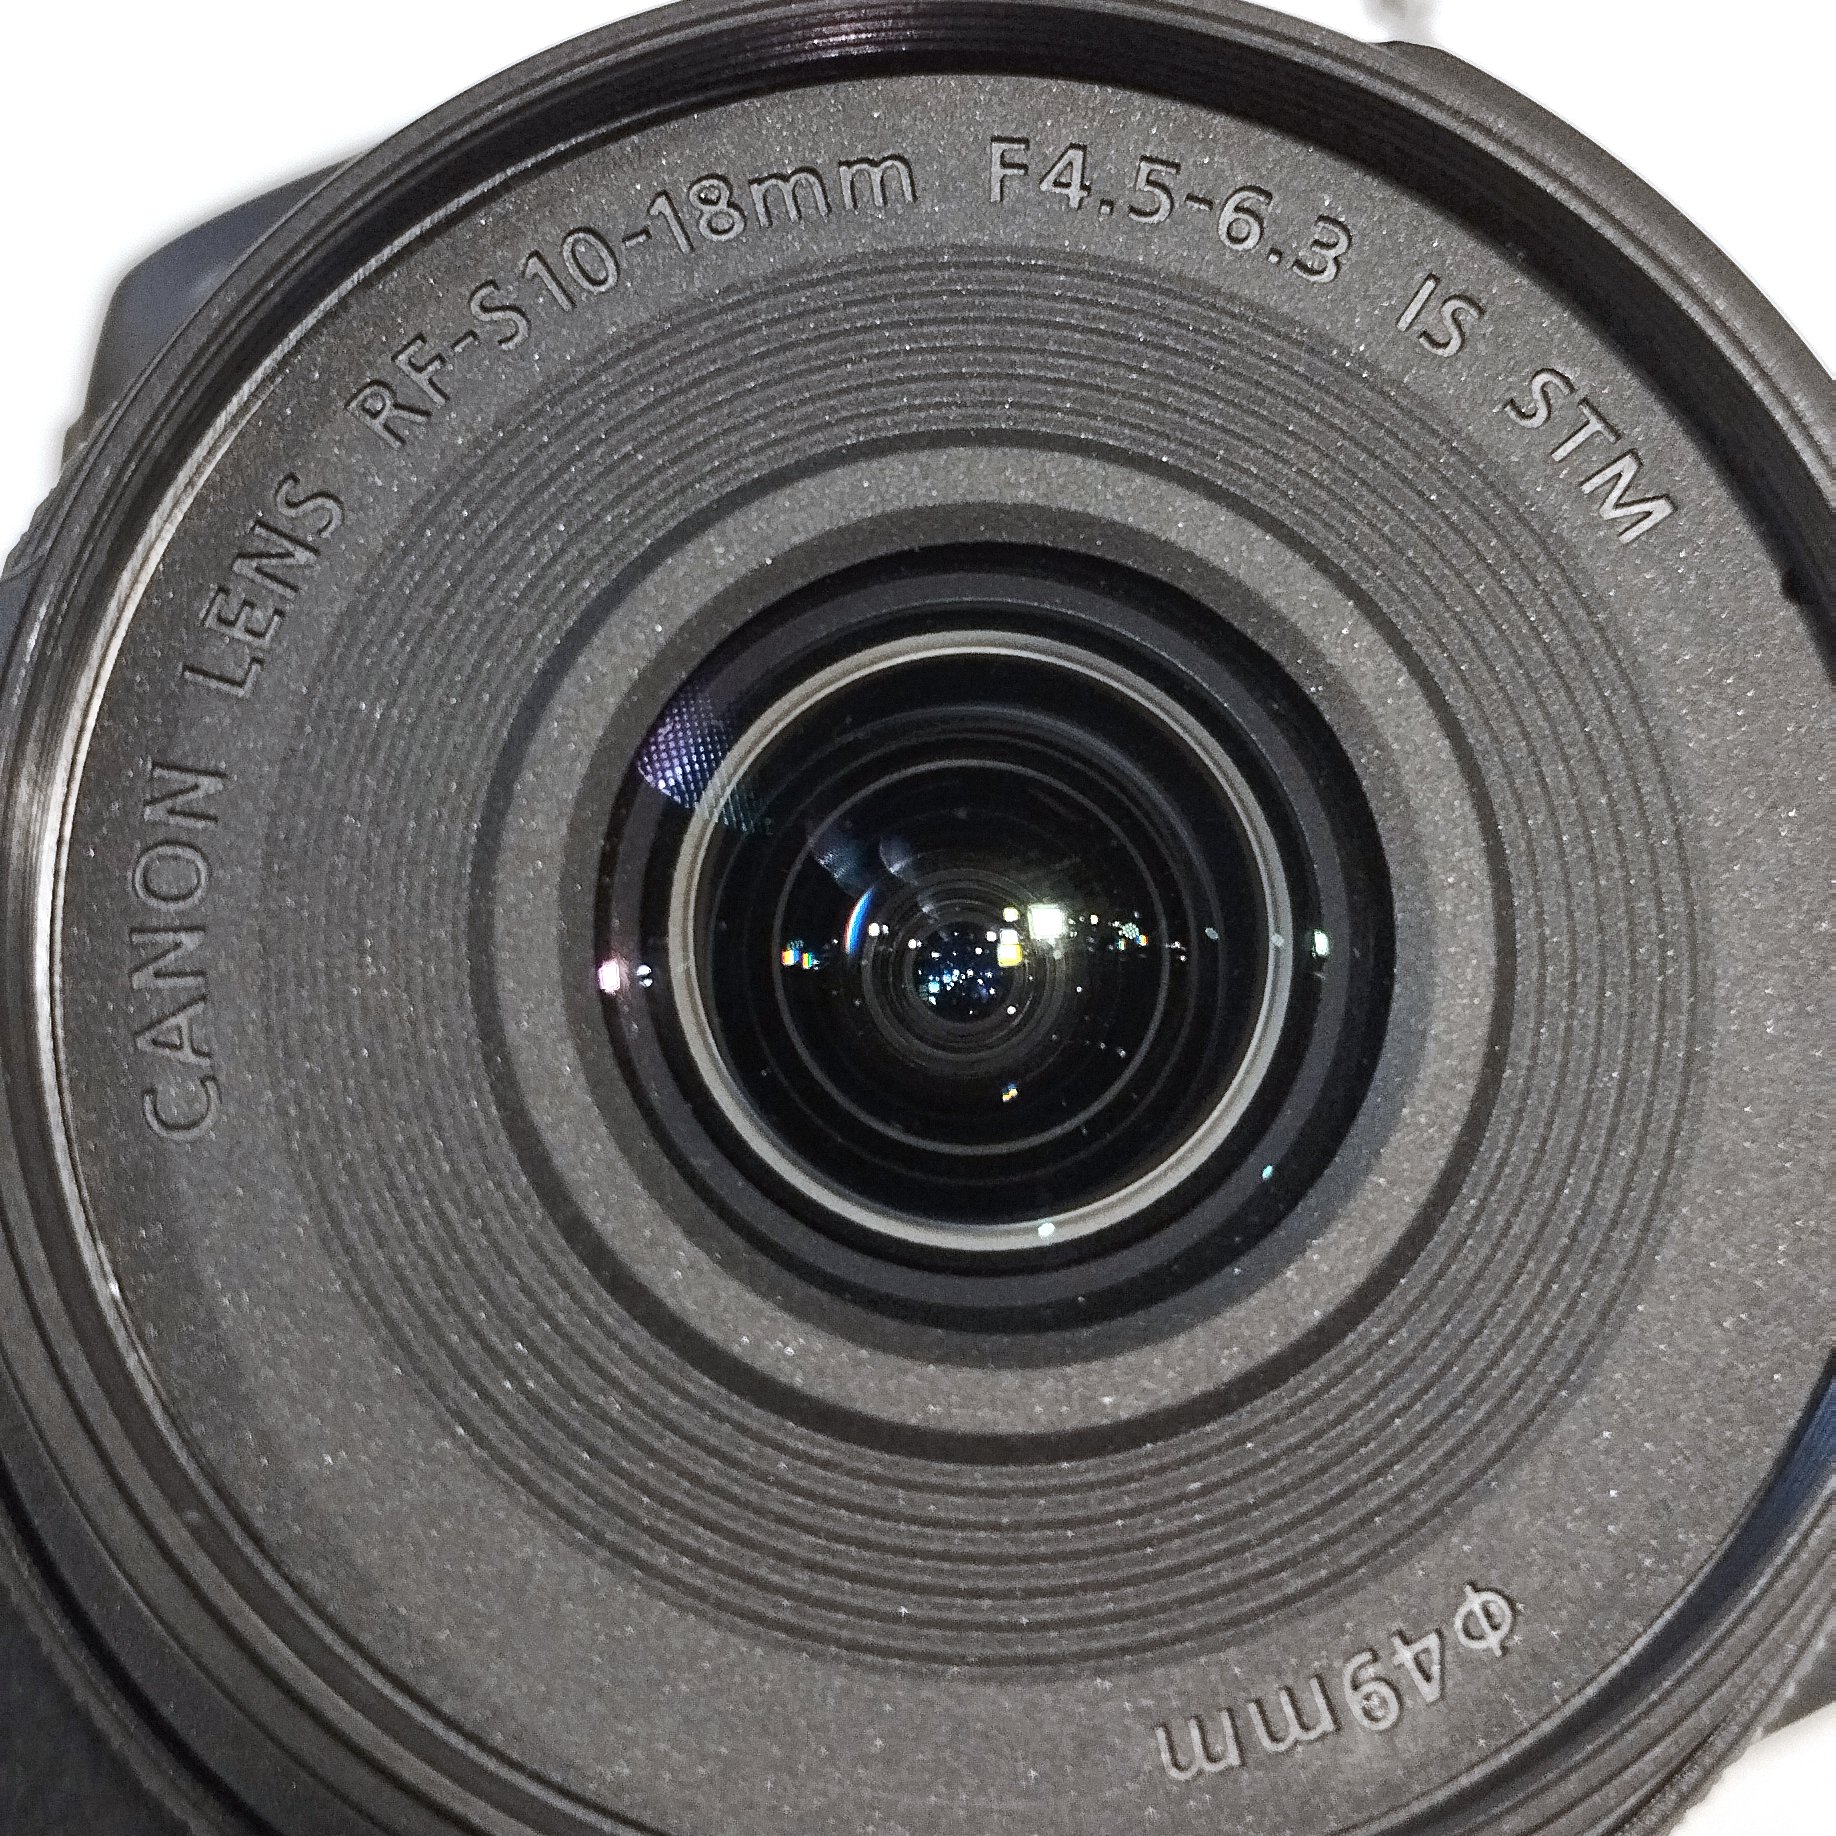 rfs1018l03 - Here is the unannounced Canon RF-S 10-18mm f/4.5-6.3 IS STM